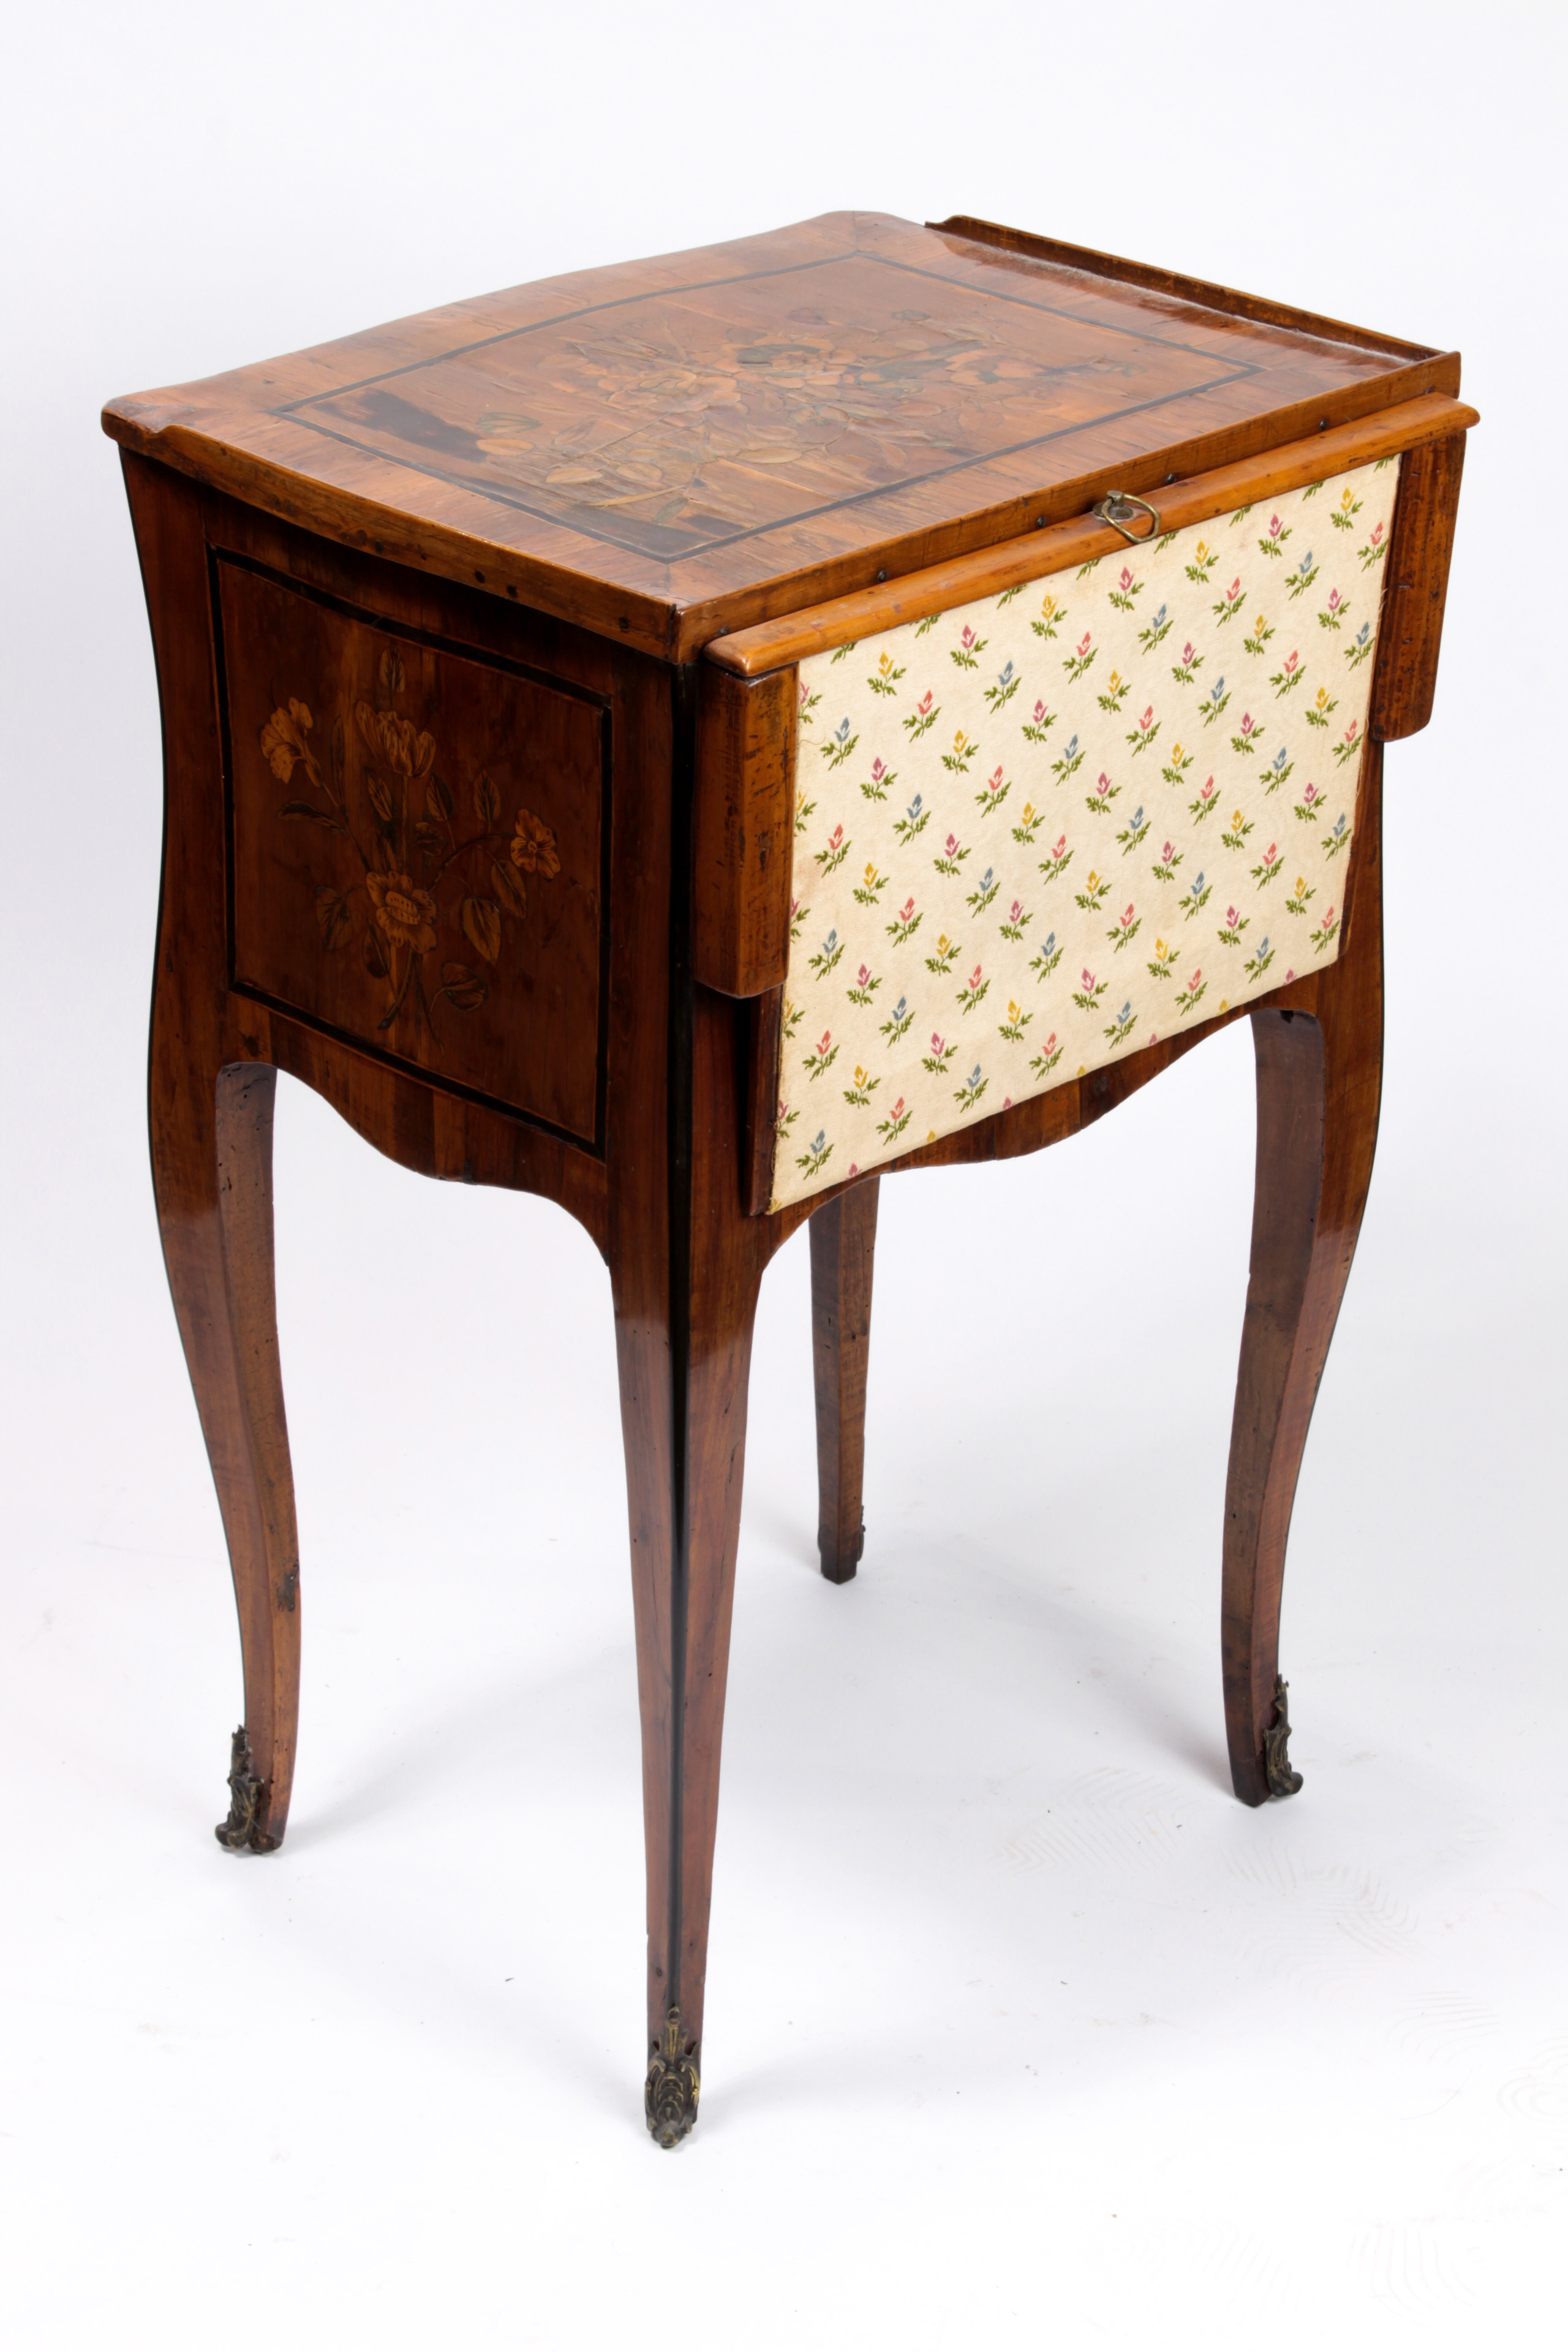 A French Provincial inlaid commode - Image 3 of 3